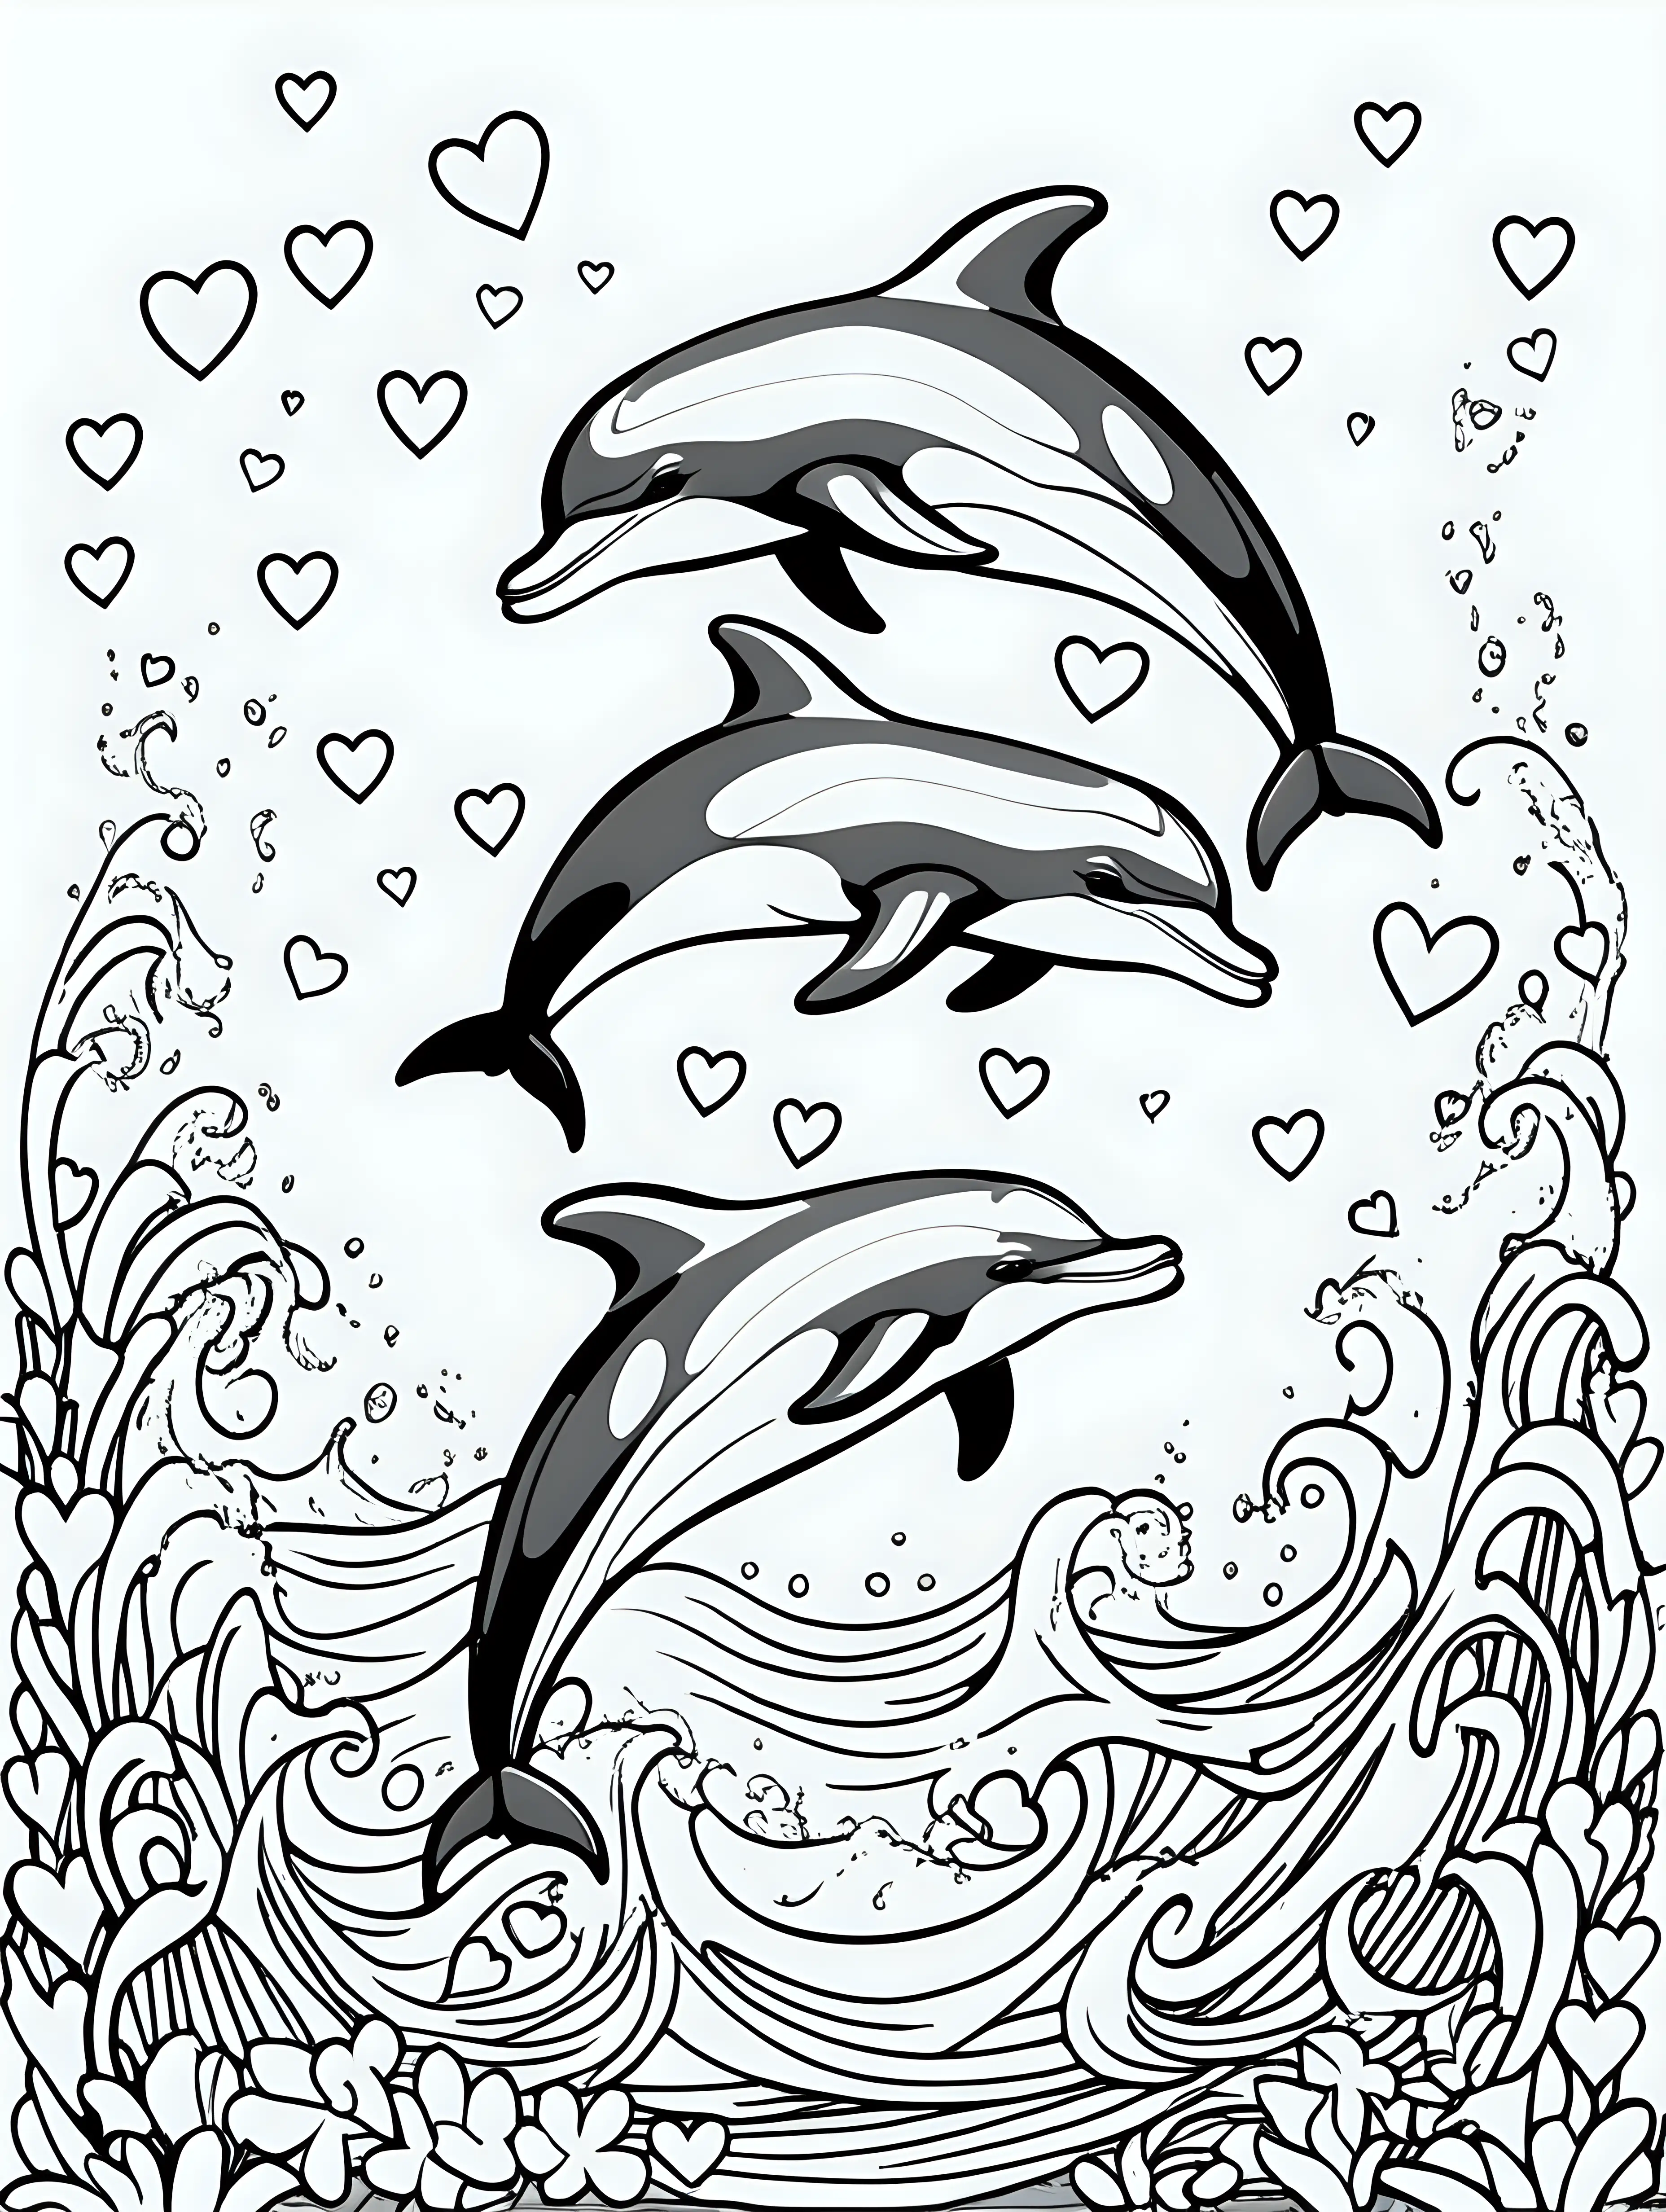 create a black line detailed sketch illustration coloring page of cute dolphins playing in the ocean surrounded with hearts, crisp black outlines, no shading